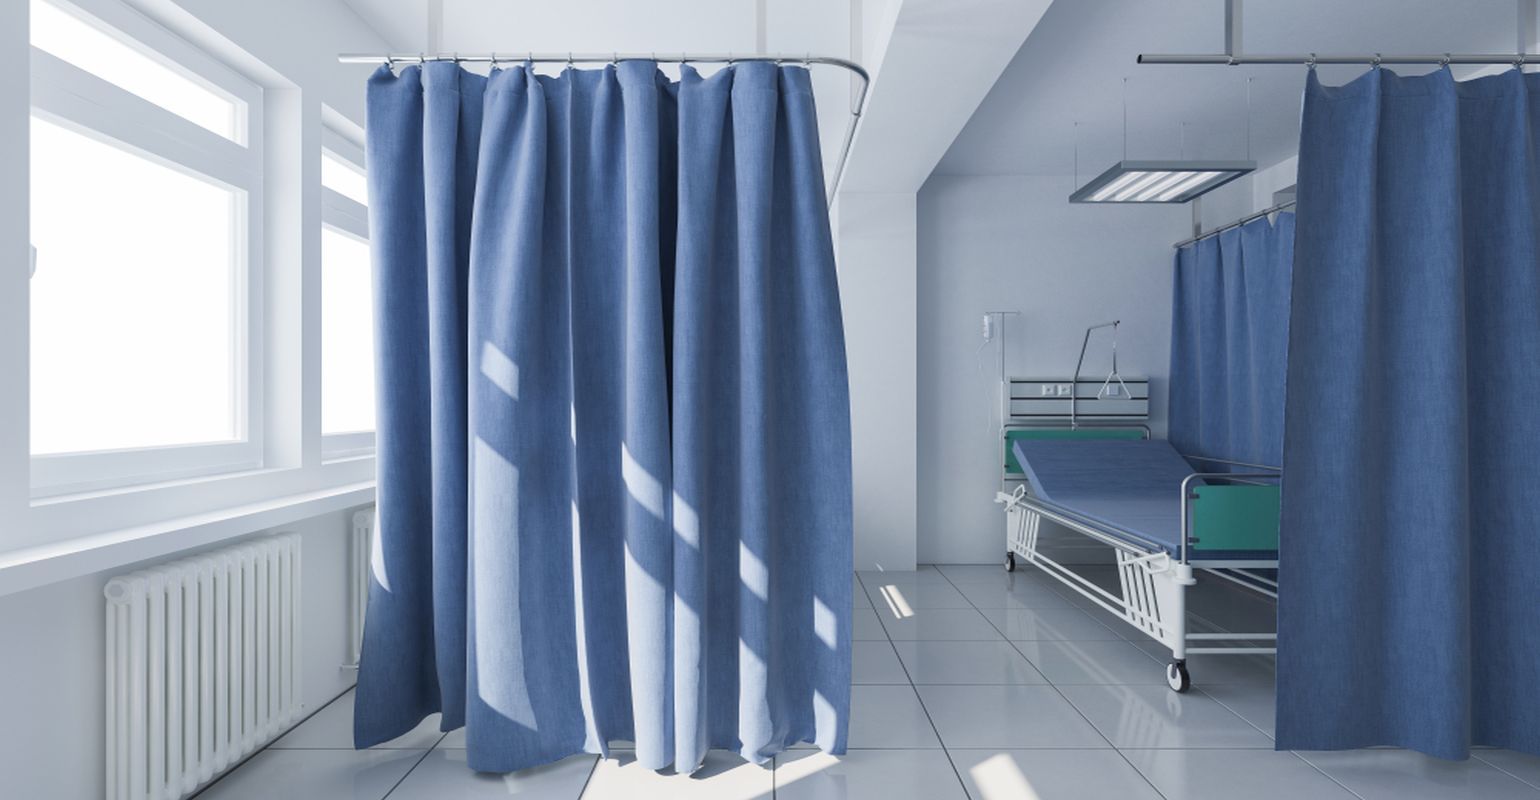 Hospital Privacy Curtains and Bed Sheets: Soft Surface Contamination and  Transmission